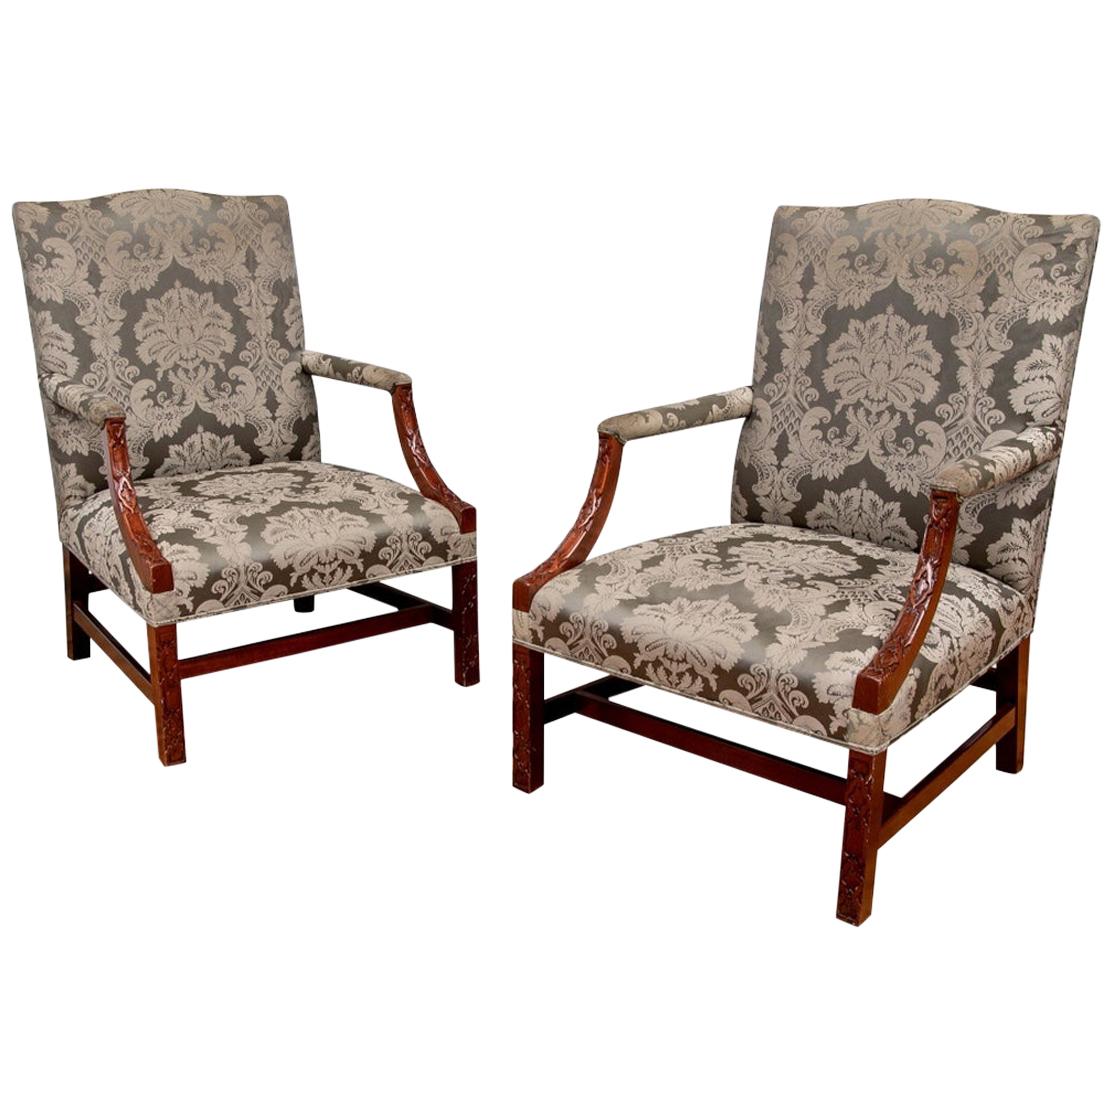 Exceptional Pair of Antique George III Carved Mahogany Library Armchairs